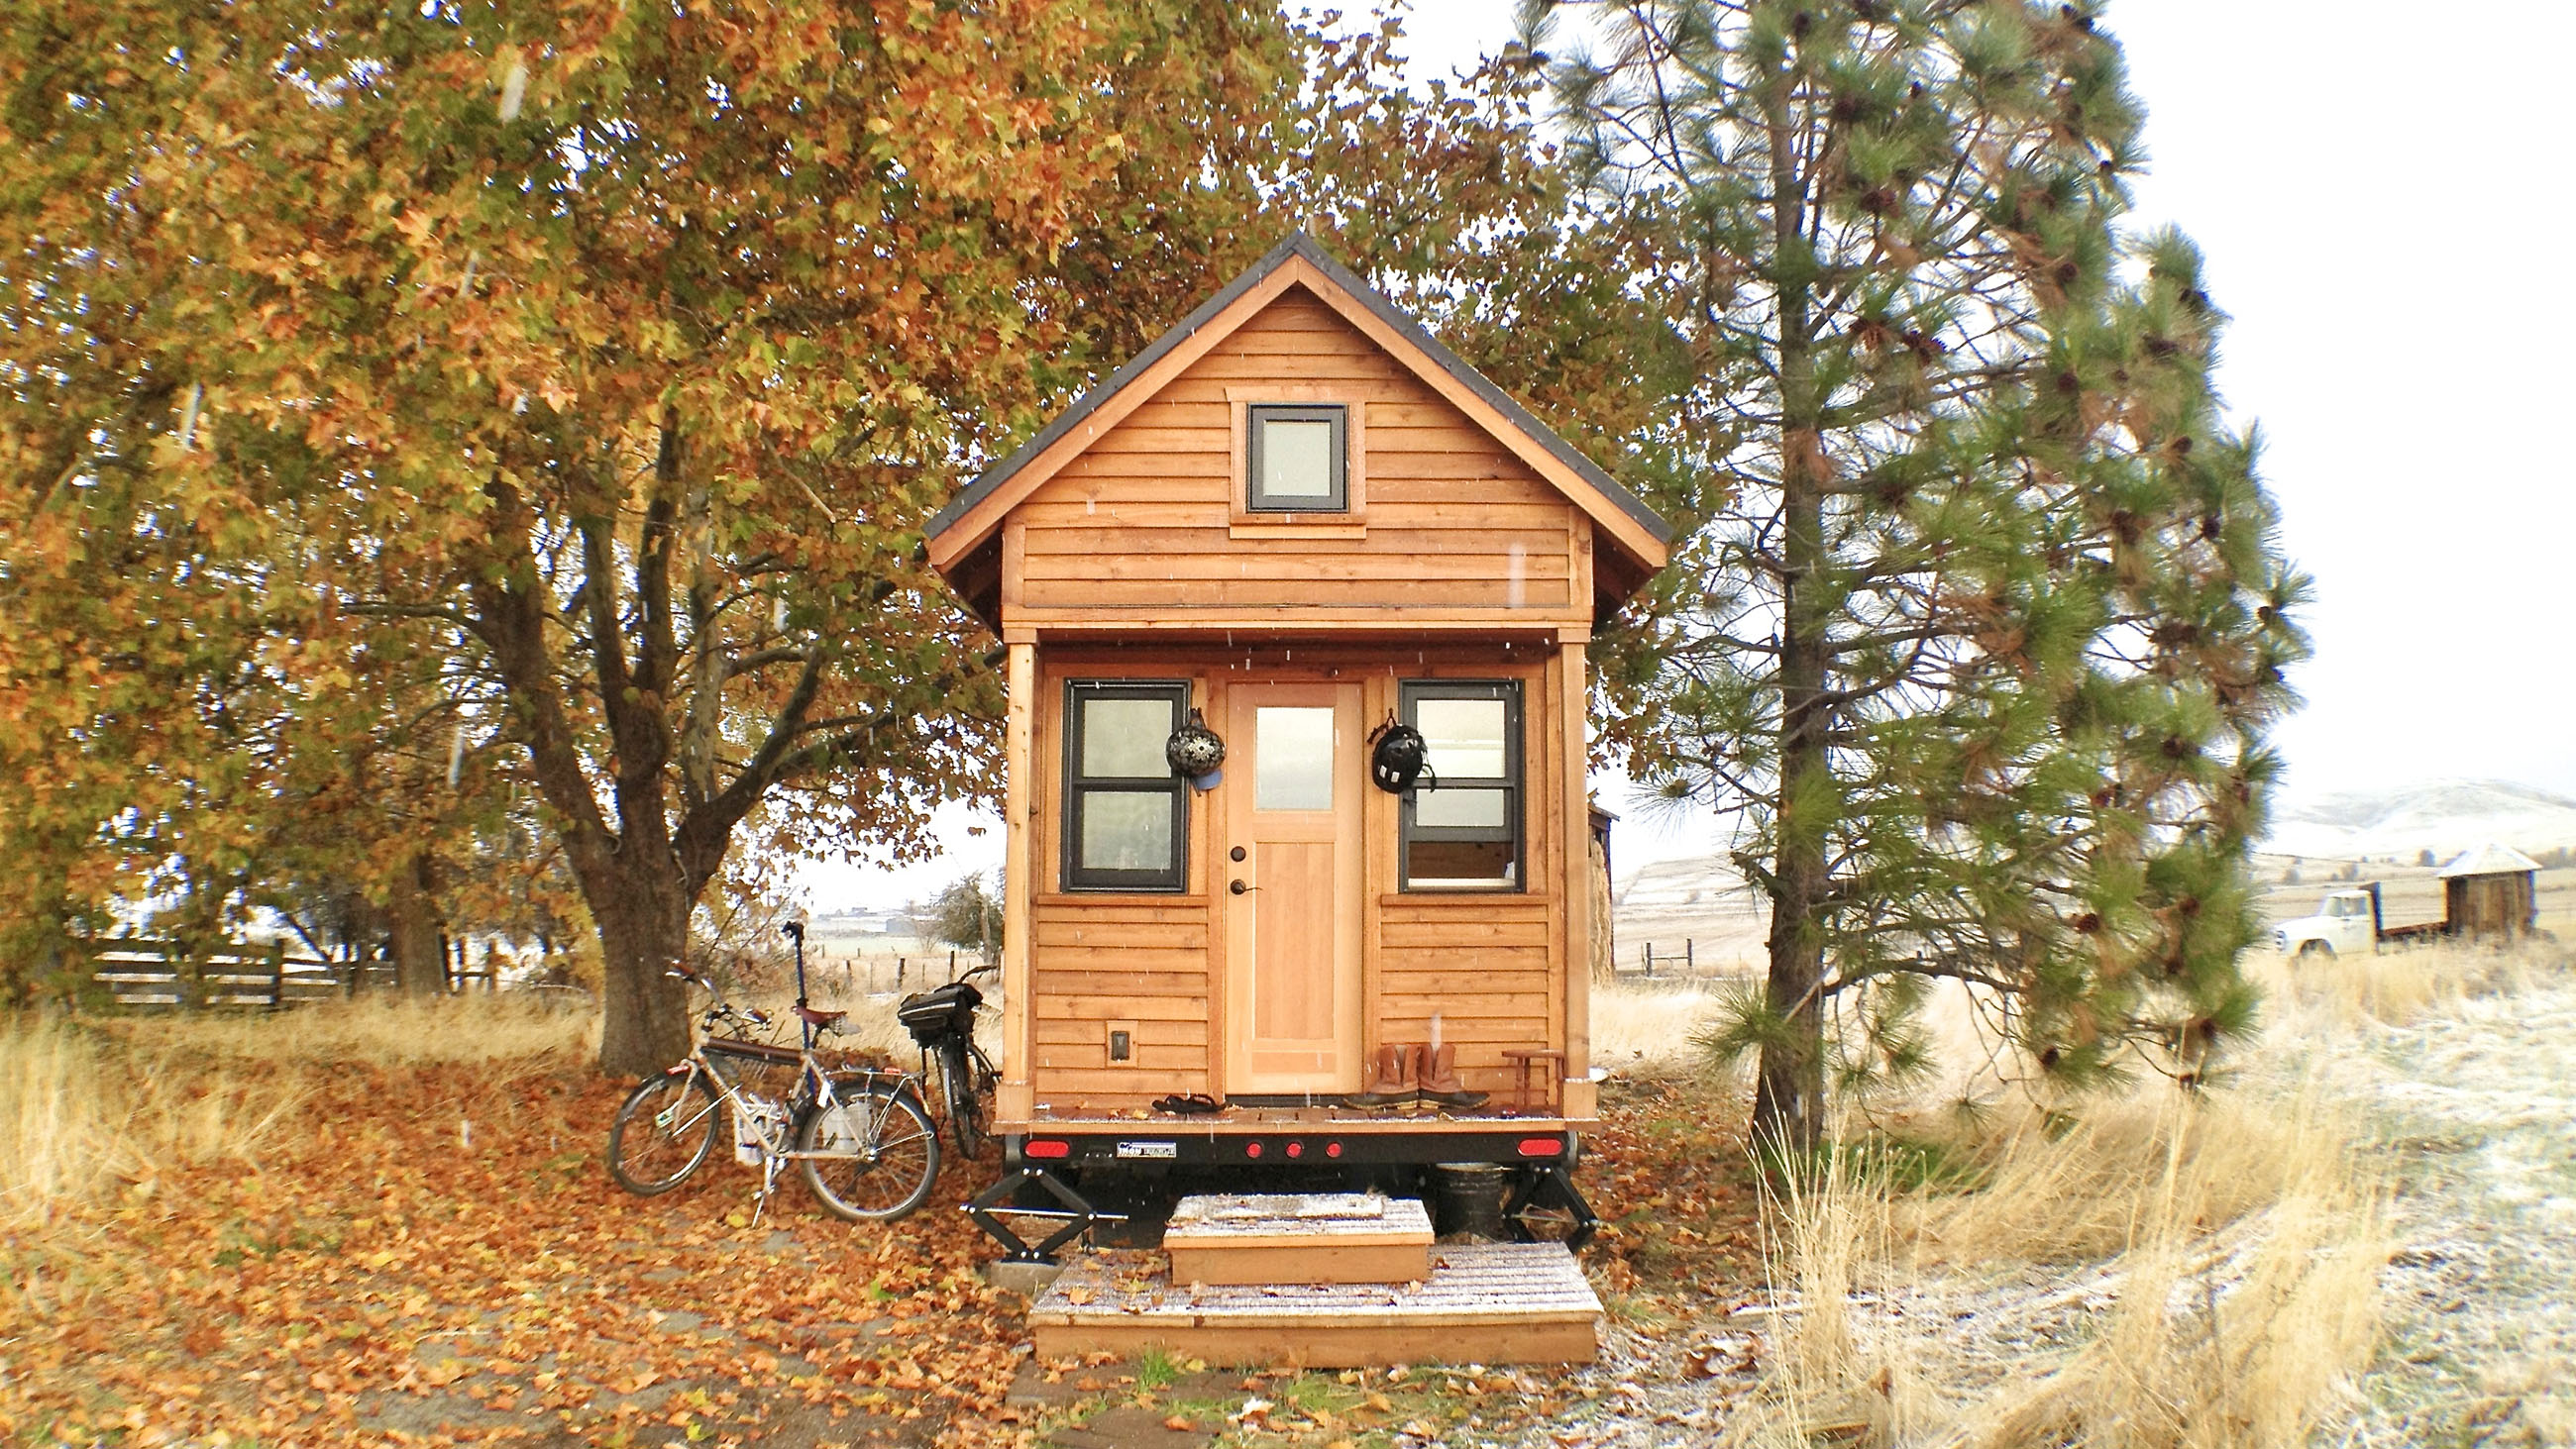 Not all tiny homes are created equal. Location, design, and amenities all play a part in how small living affects our well-being.